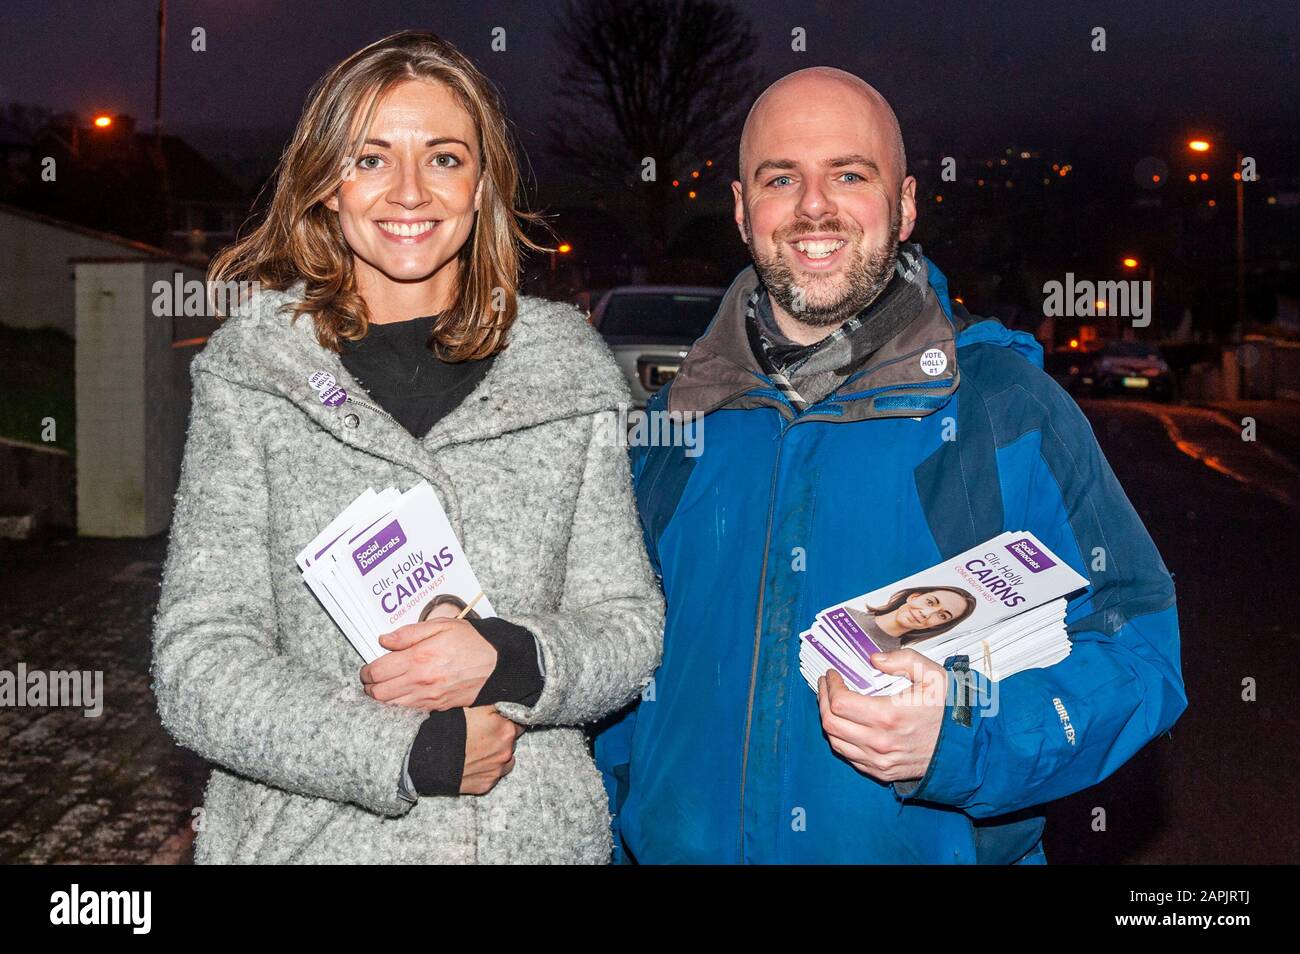 Bantry, West Cork, Ireland. 23rd Jan, 2020. Cllr. Holly Cairns was out canvassing the people of Bantry this evening with Richard Scriven and her team. Credit: Andy Gibson/Alamy Live News Stock Photo